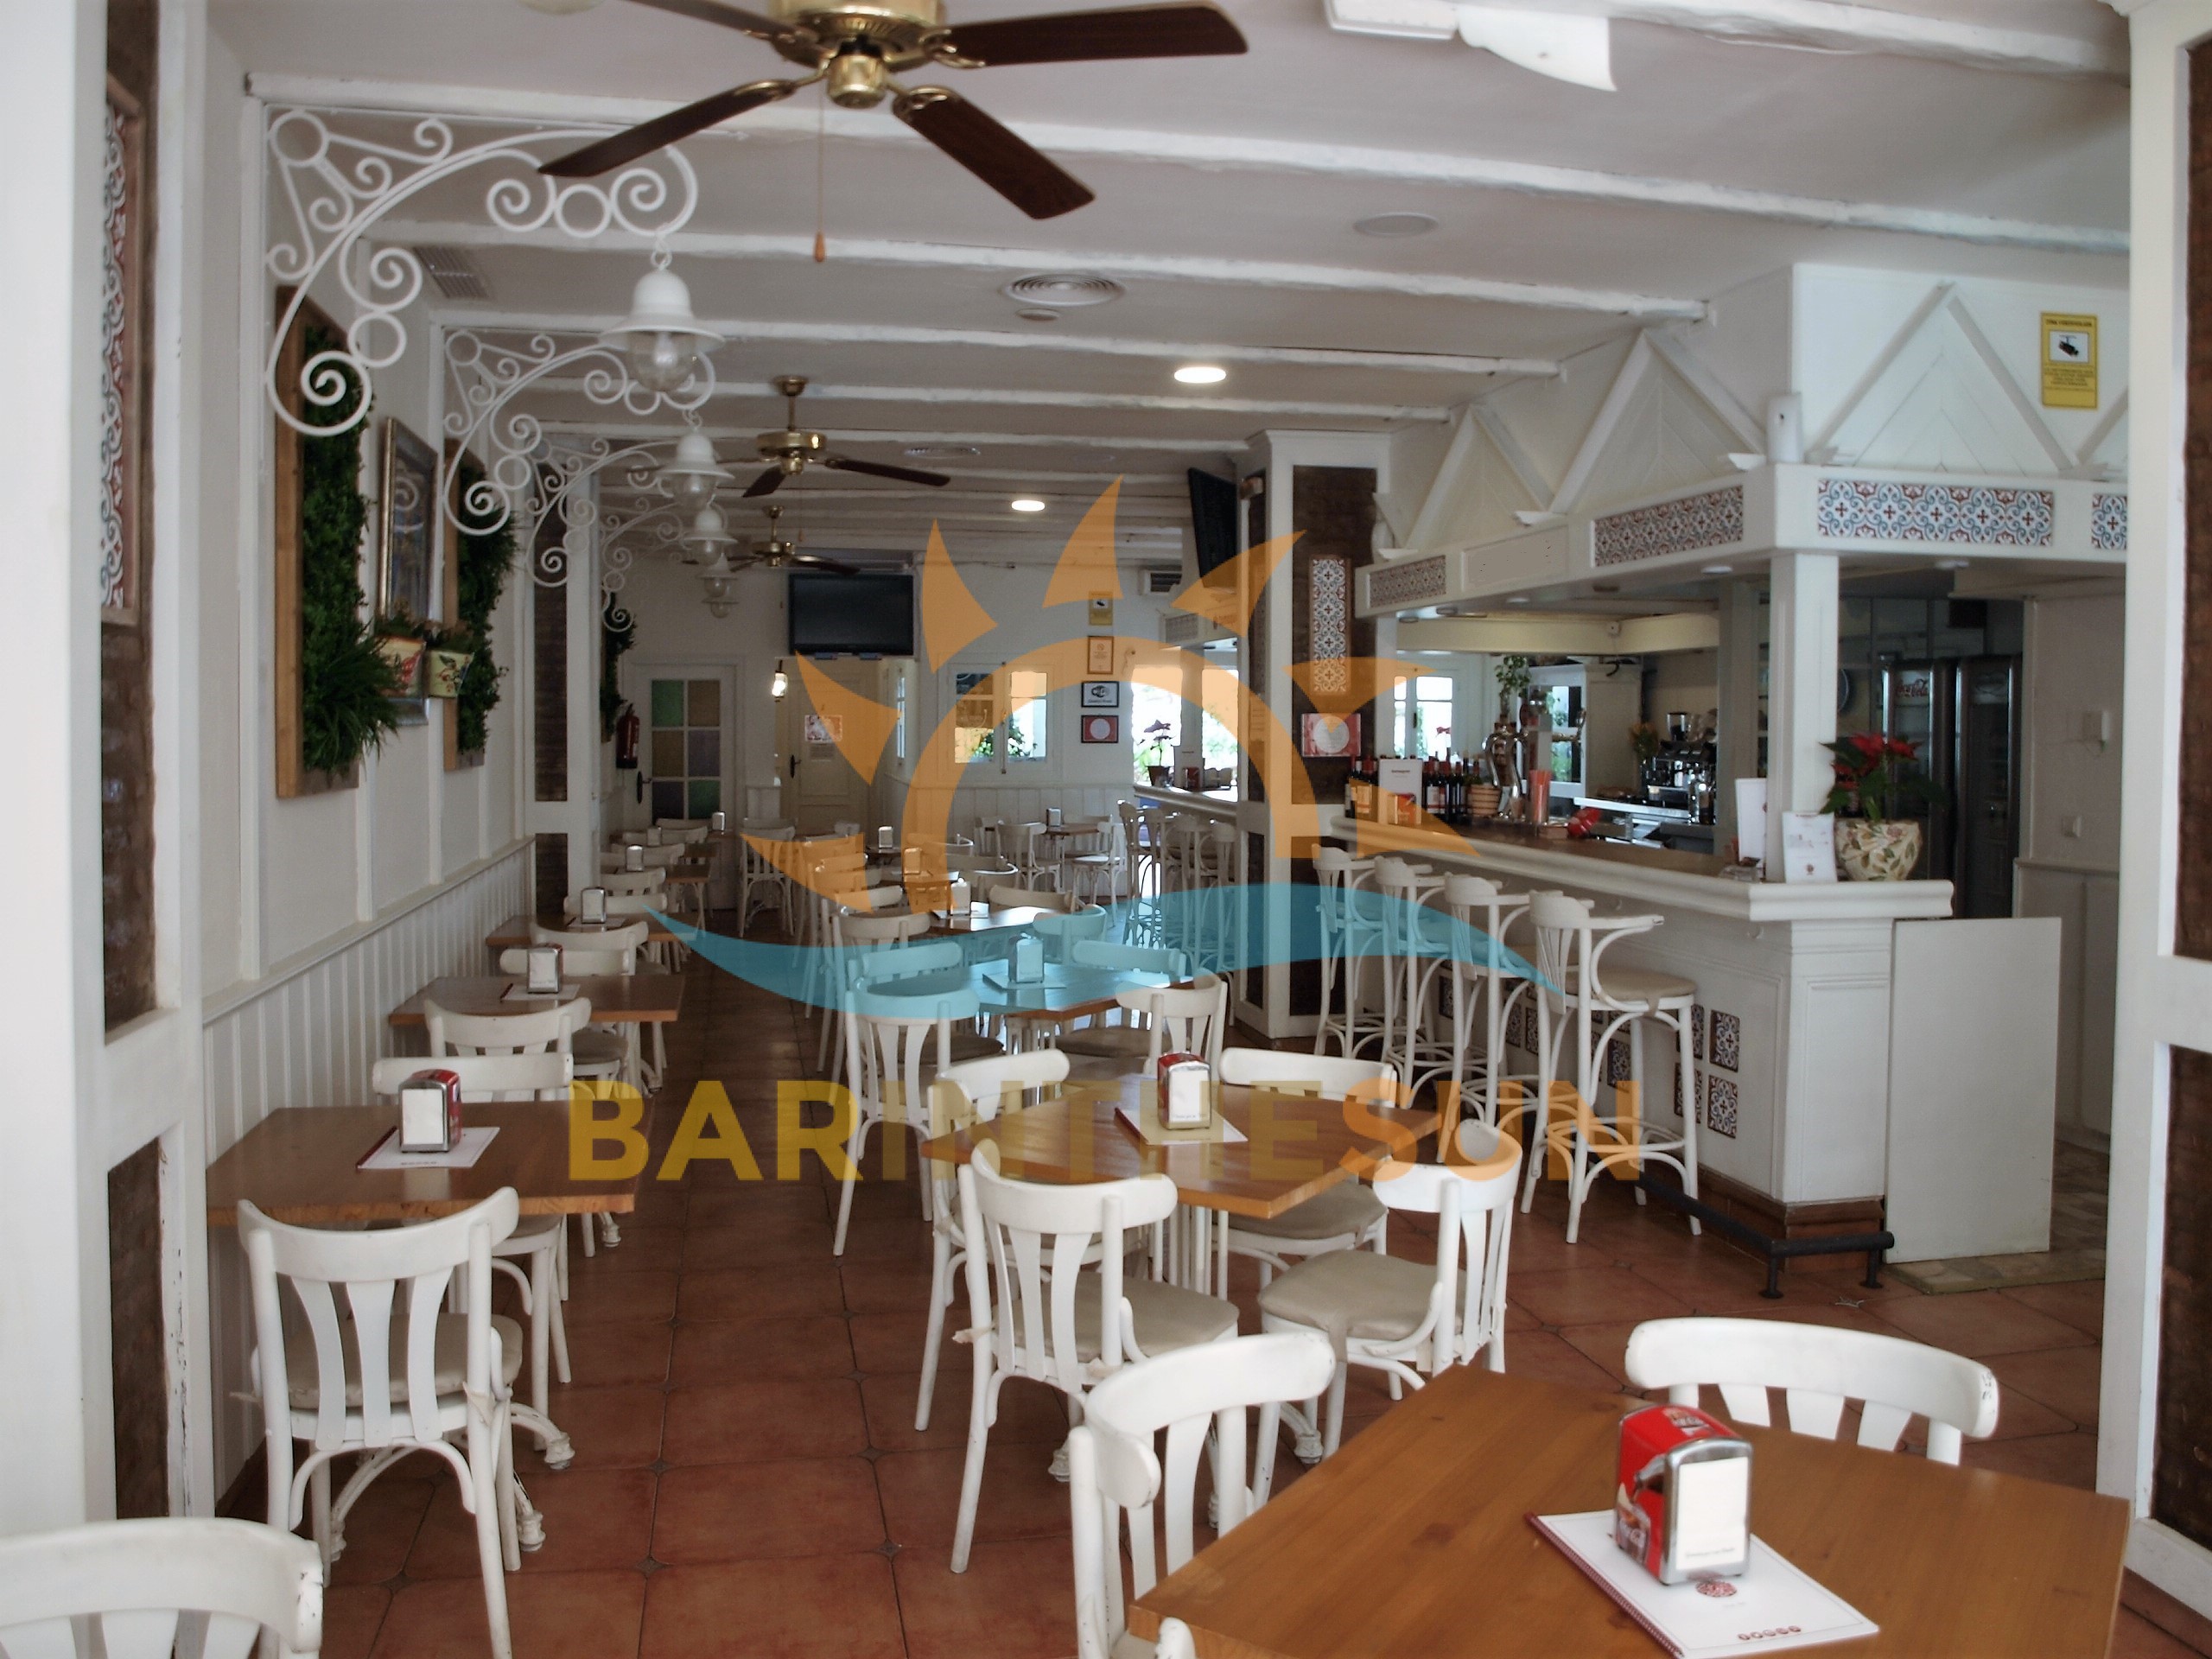 Freehold Bar Restaurants For Sale in Fuengirola on The Costa del Sol in Spain